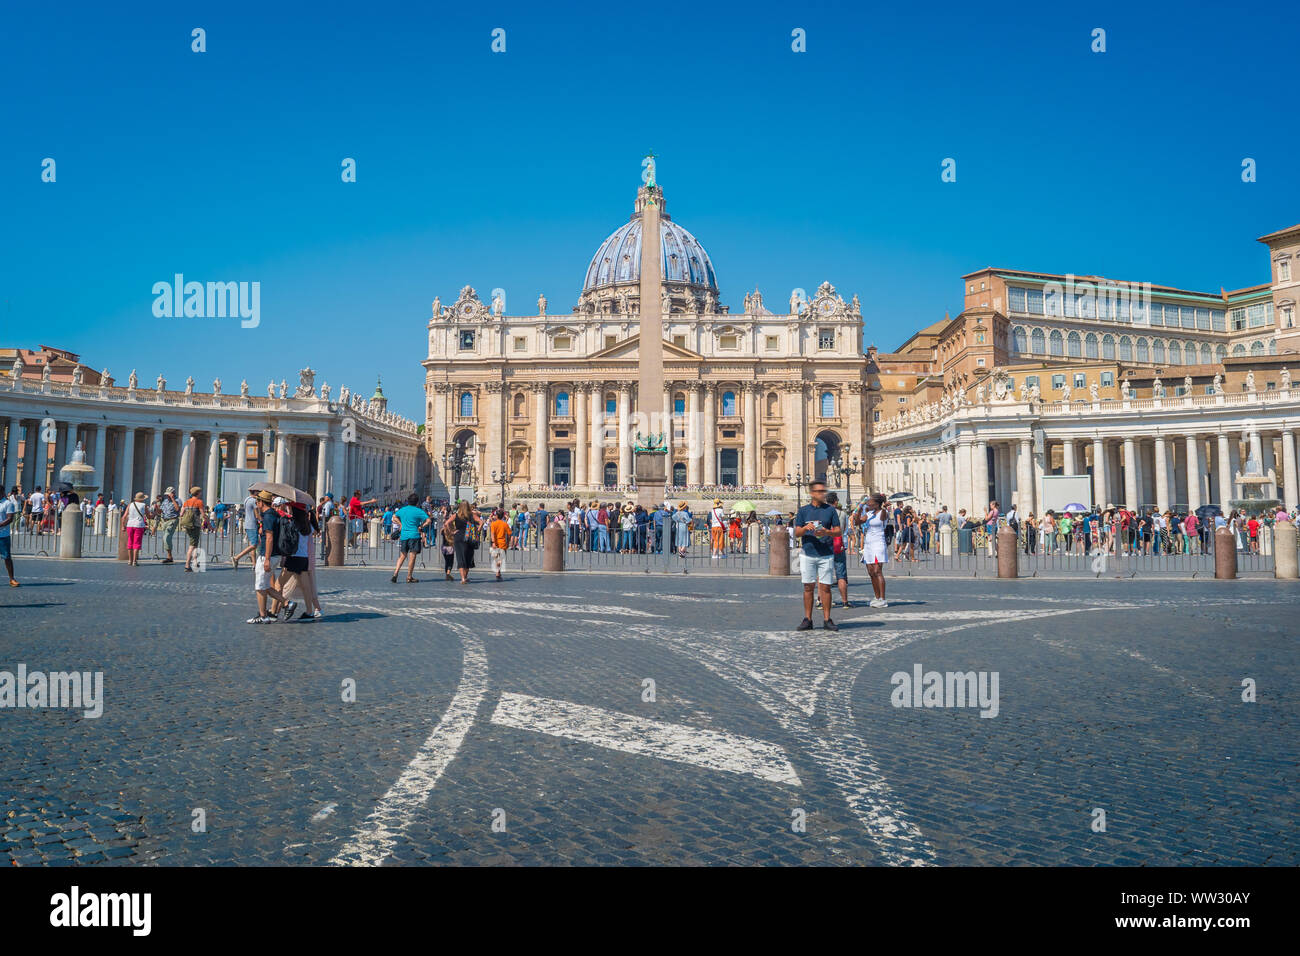 St. Peter's Basilica and the Egyptian Obelisk in St. Peter's Square in Vatican City Stock Photo